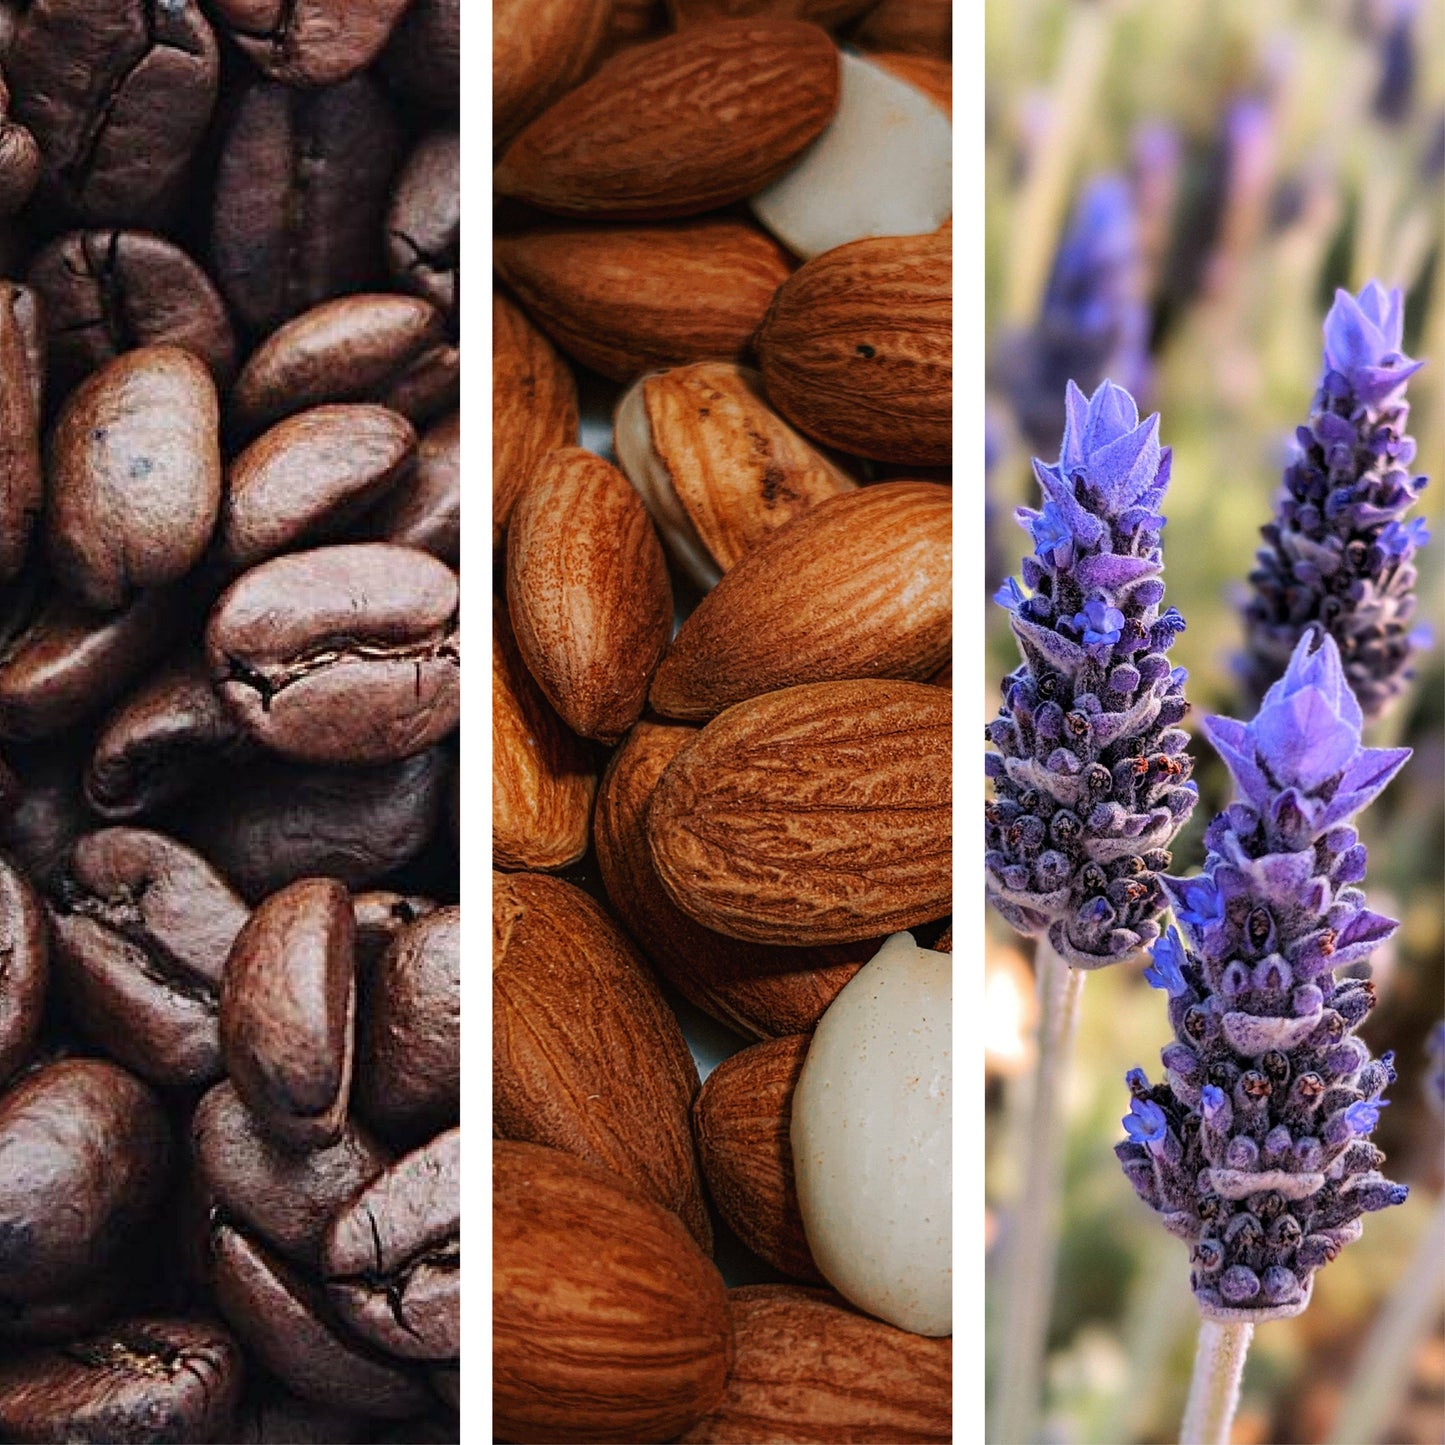 Image of coffee beans almond and lavender